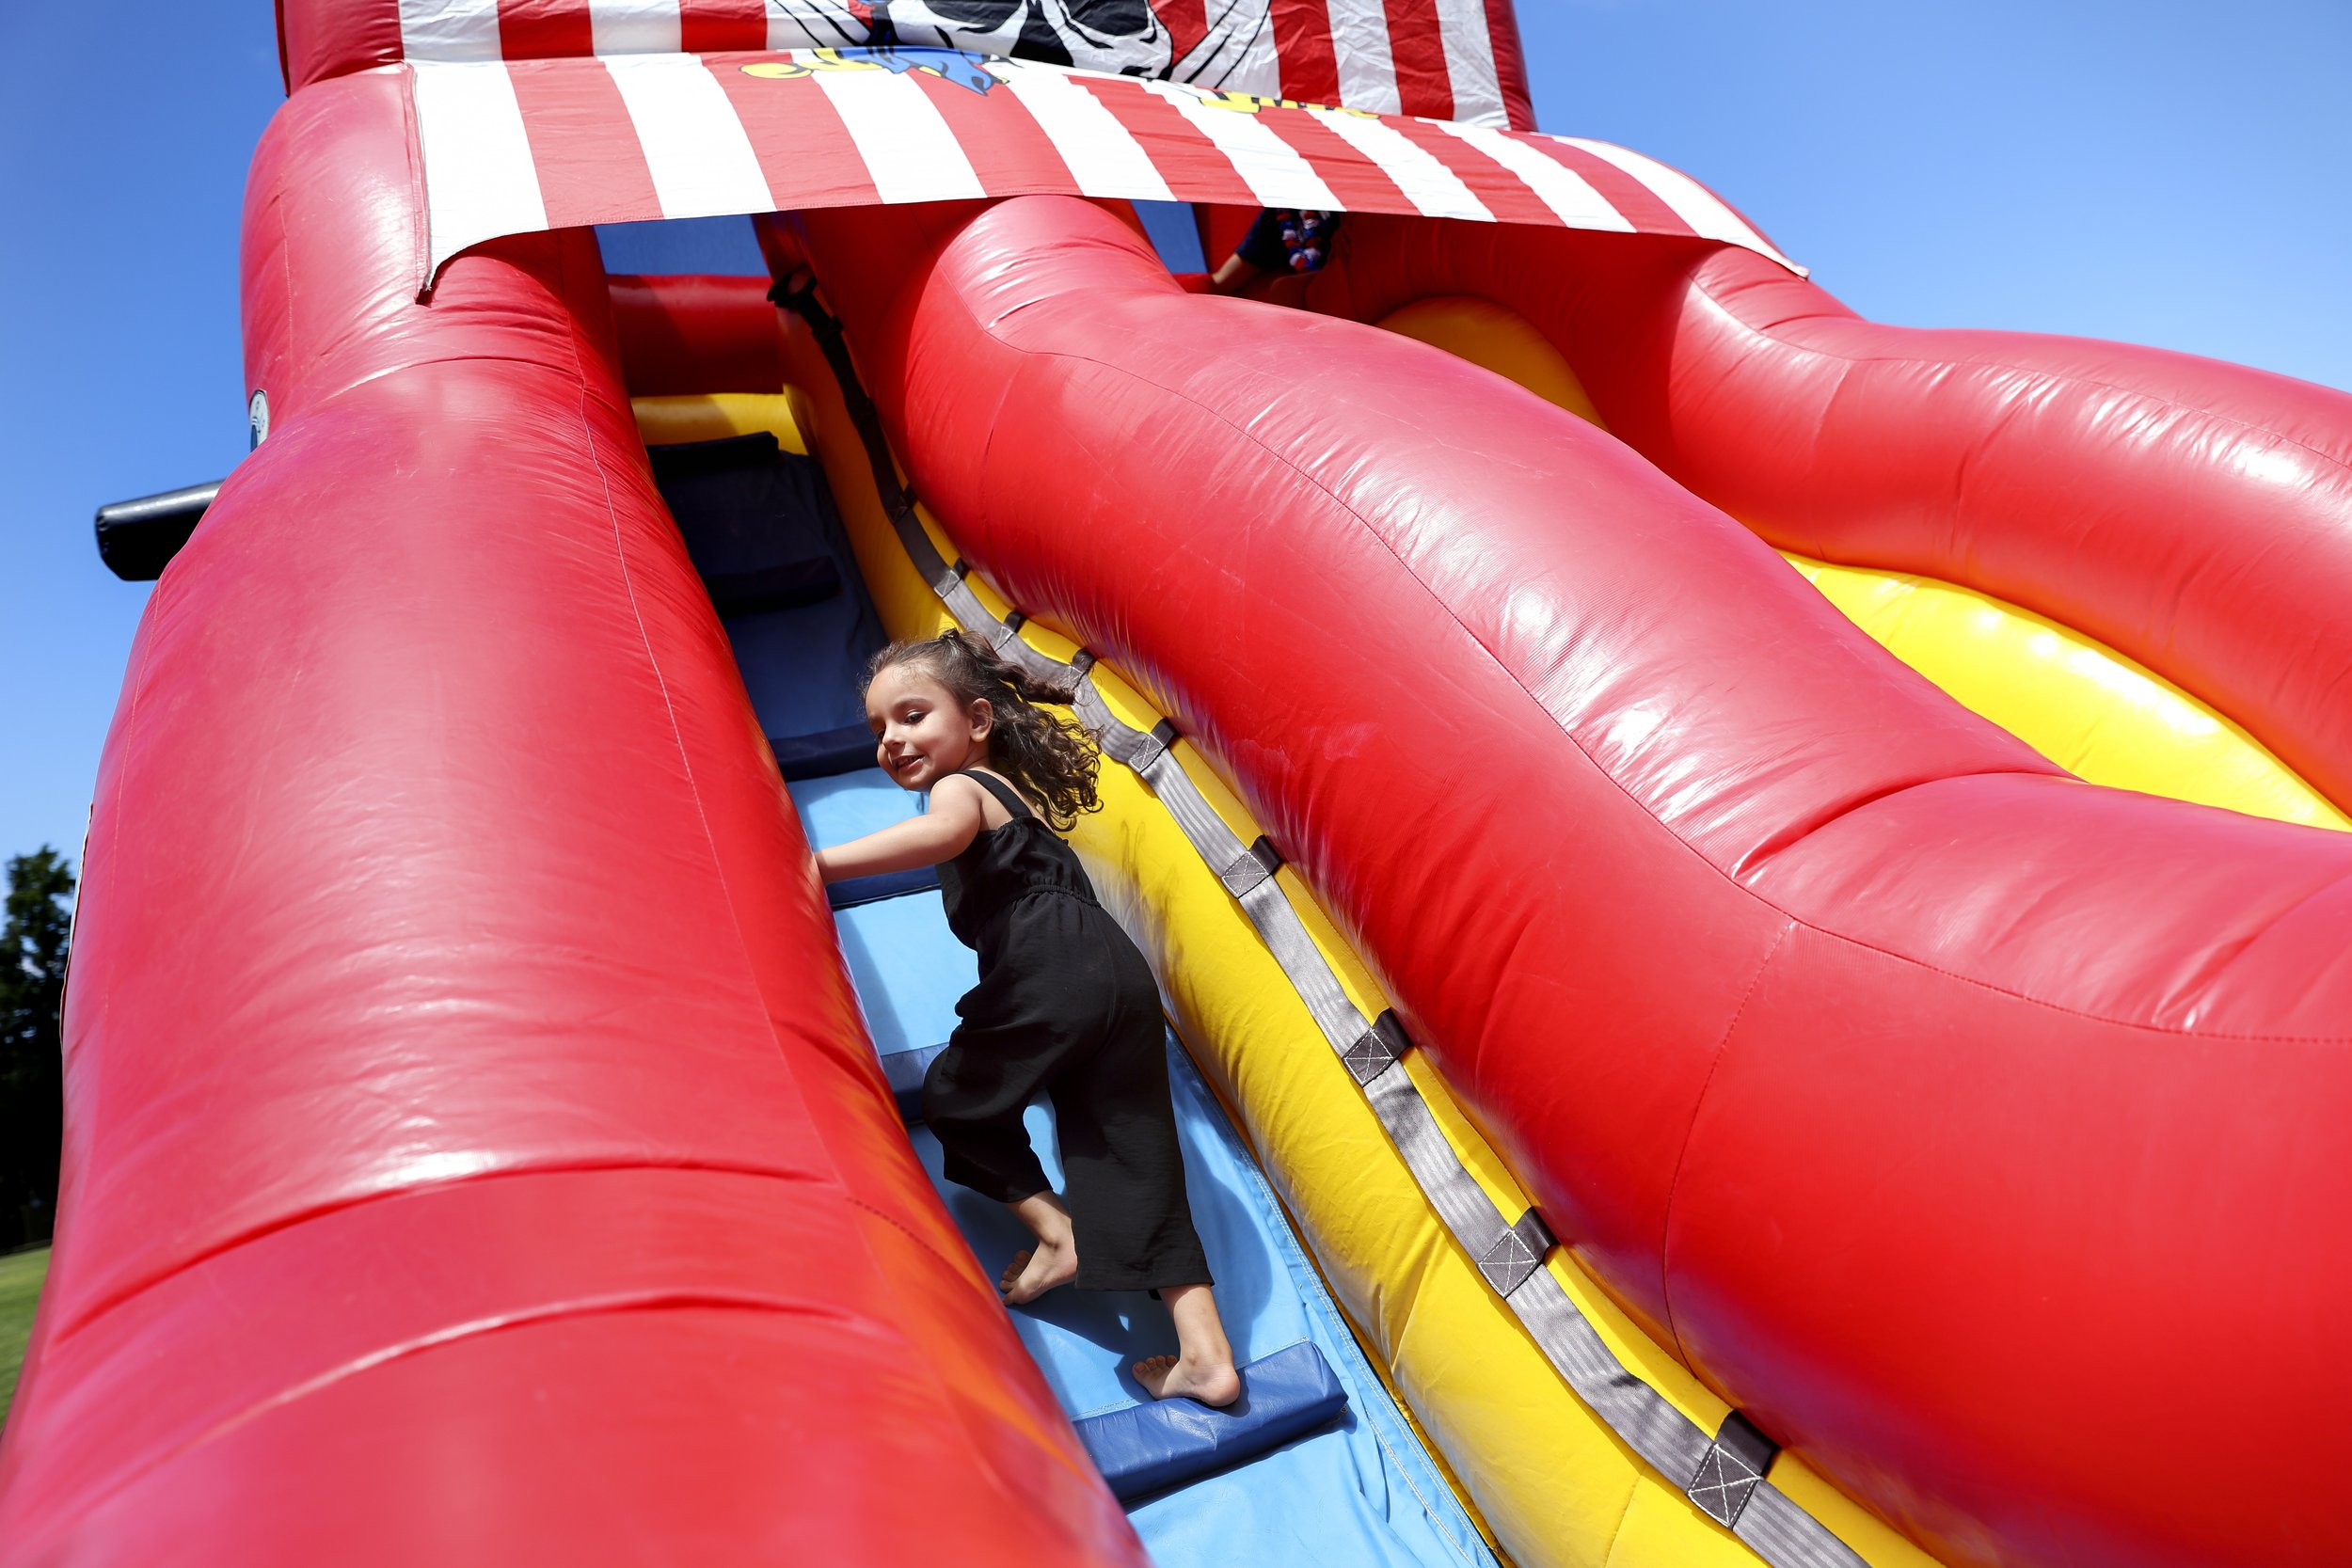  Zahra Mohammadi climbs an inflatable slide at a Fourth of July celebration in Sacramento, Calif.  on Monday, July 4, 2022. Najibullah Mohammadi, his wife Susan, their two young children Zahra and Yasar, and their soon-to-be born third child Yusuf  i